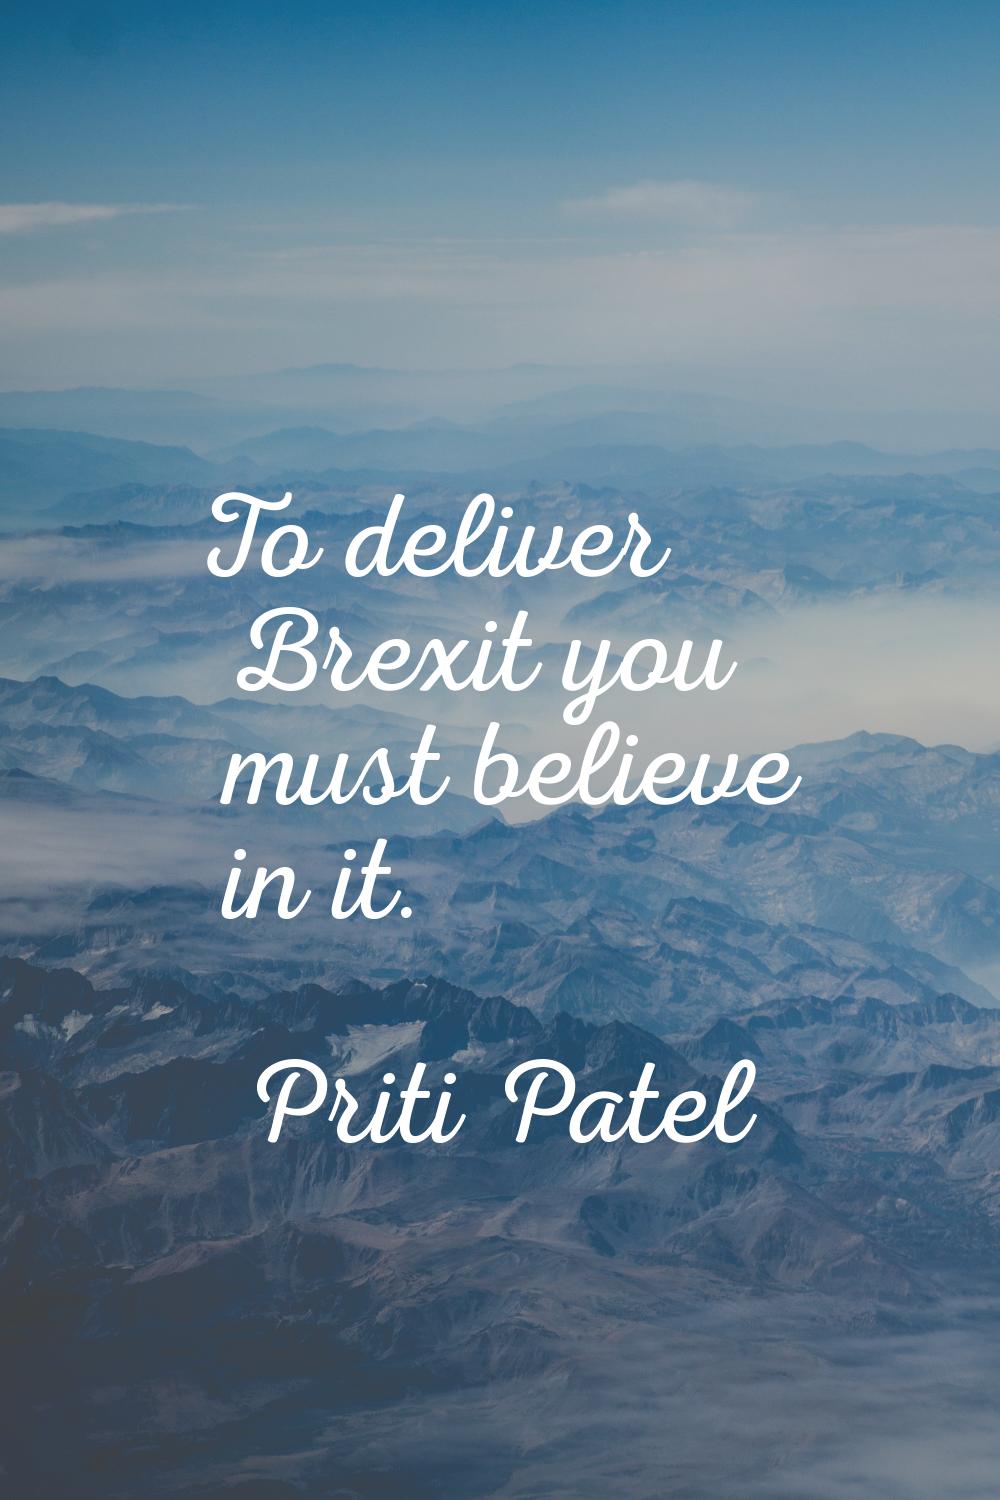 To deliver Brexit you must believe in it.